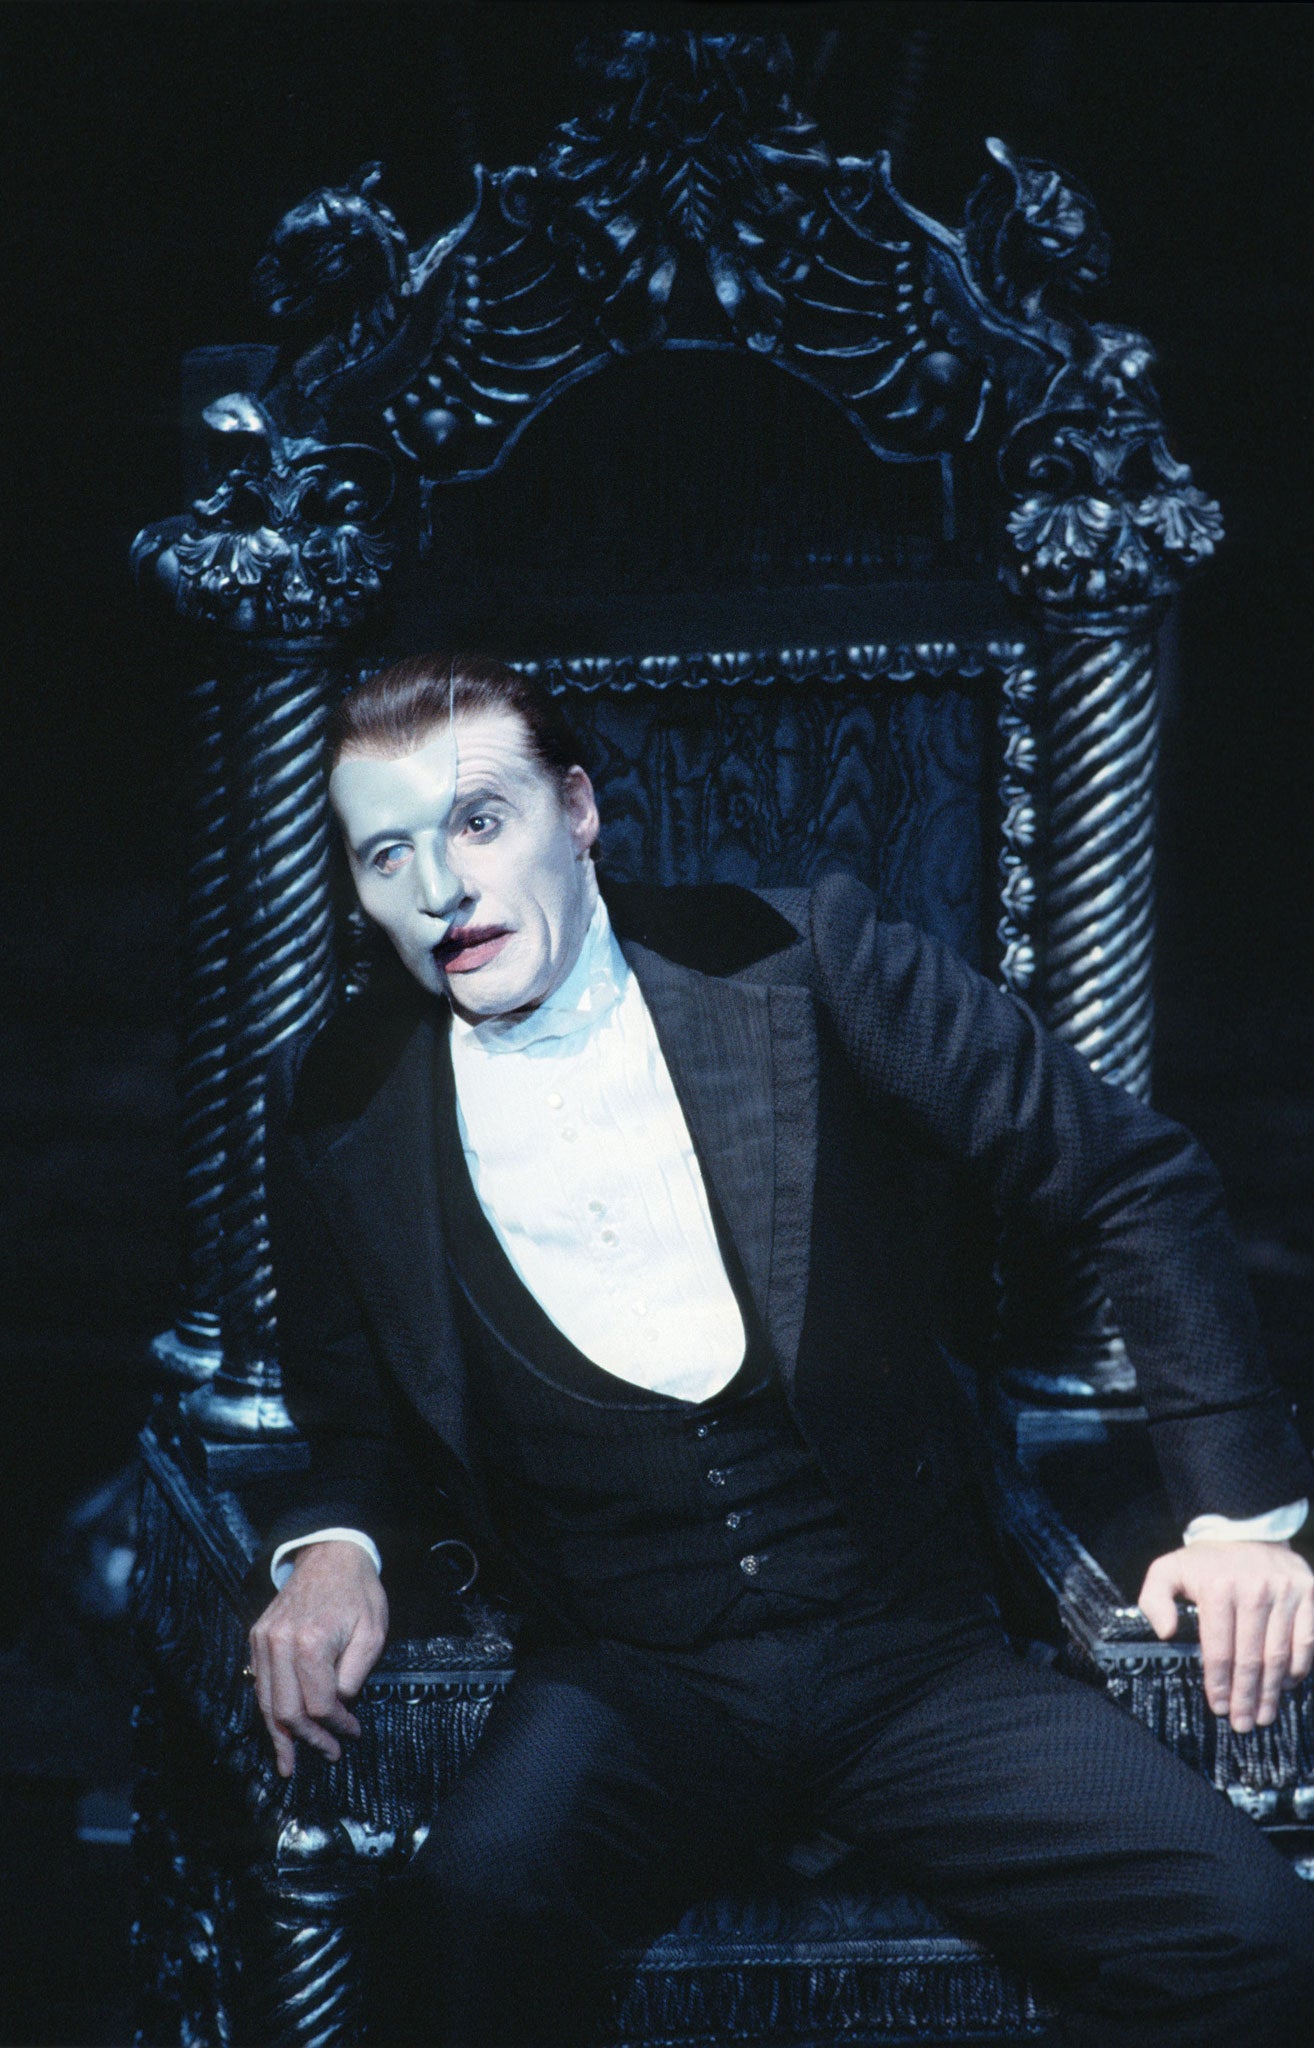 Andrew Lloyd Webber's Phantom of the Opera opened in 1986 and boasts the highest box-office revenue of any theatre production